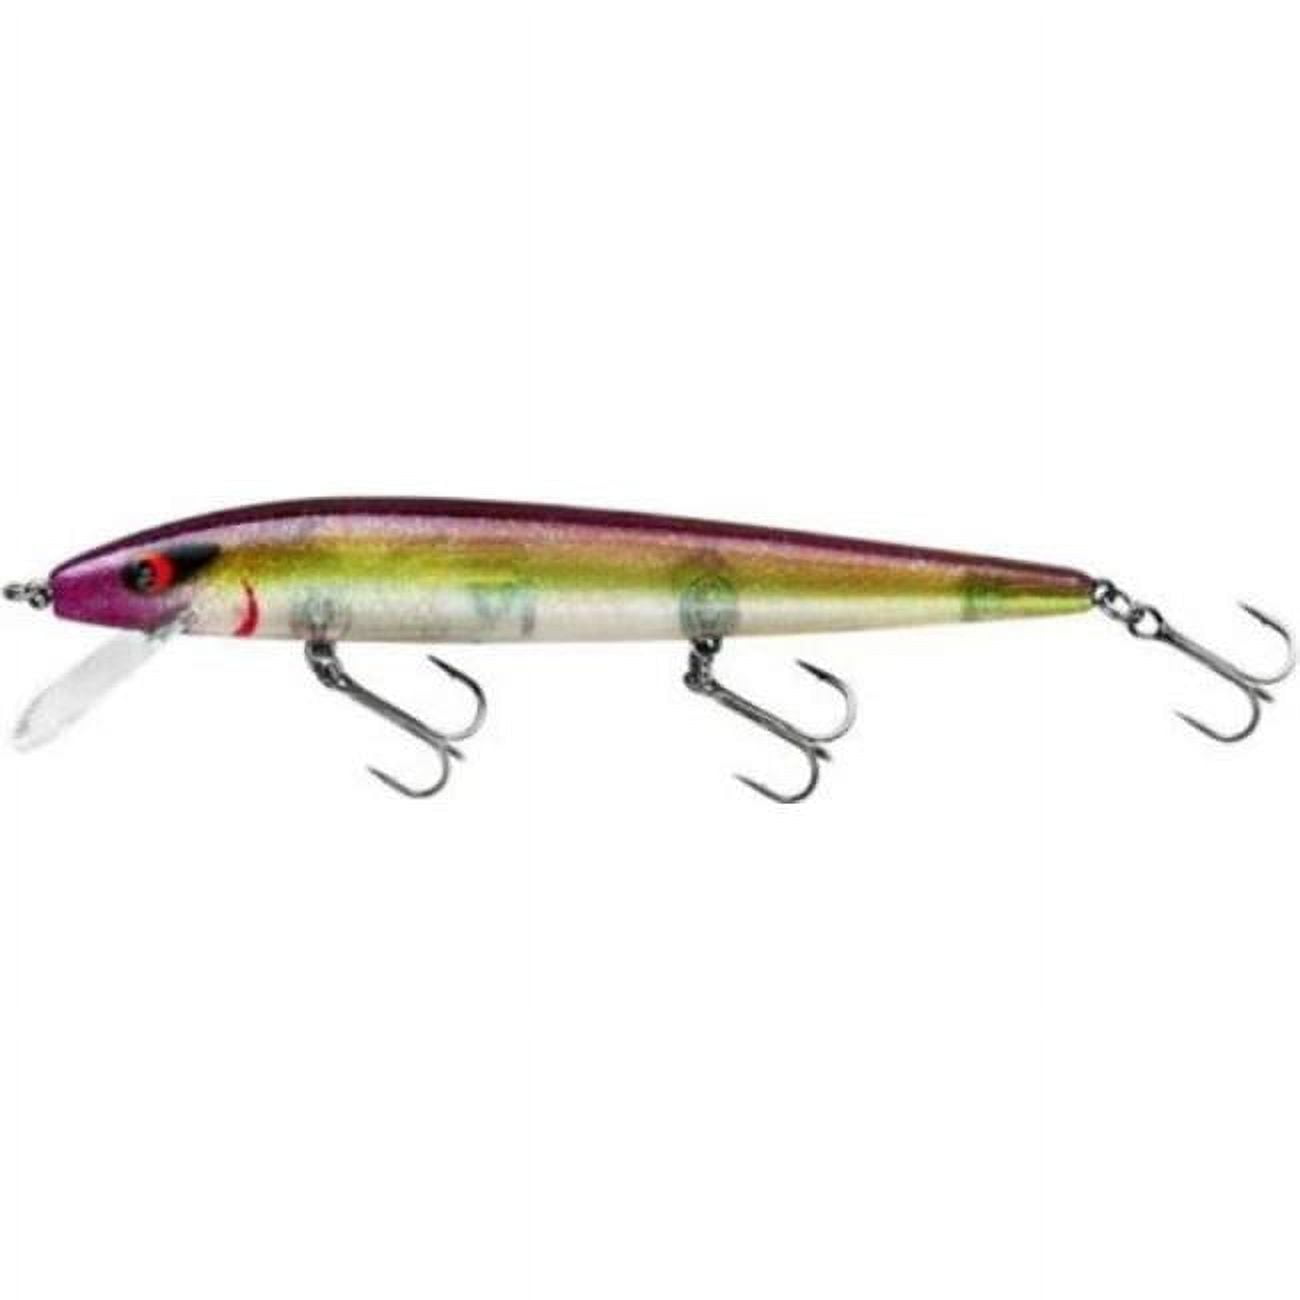 Smithwick Perfect 10 Rogue Fishing Lure Hard bait Lady 5 1/2 in 5/8 oz 